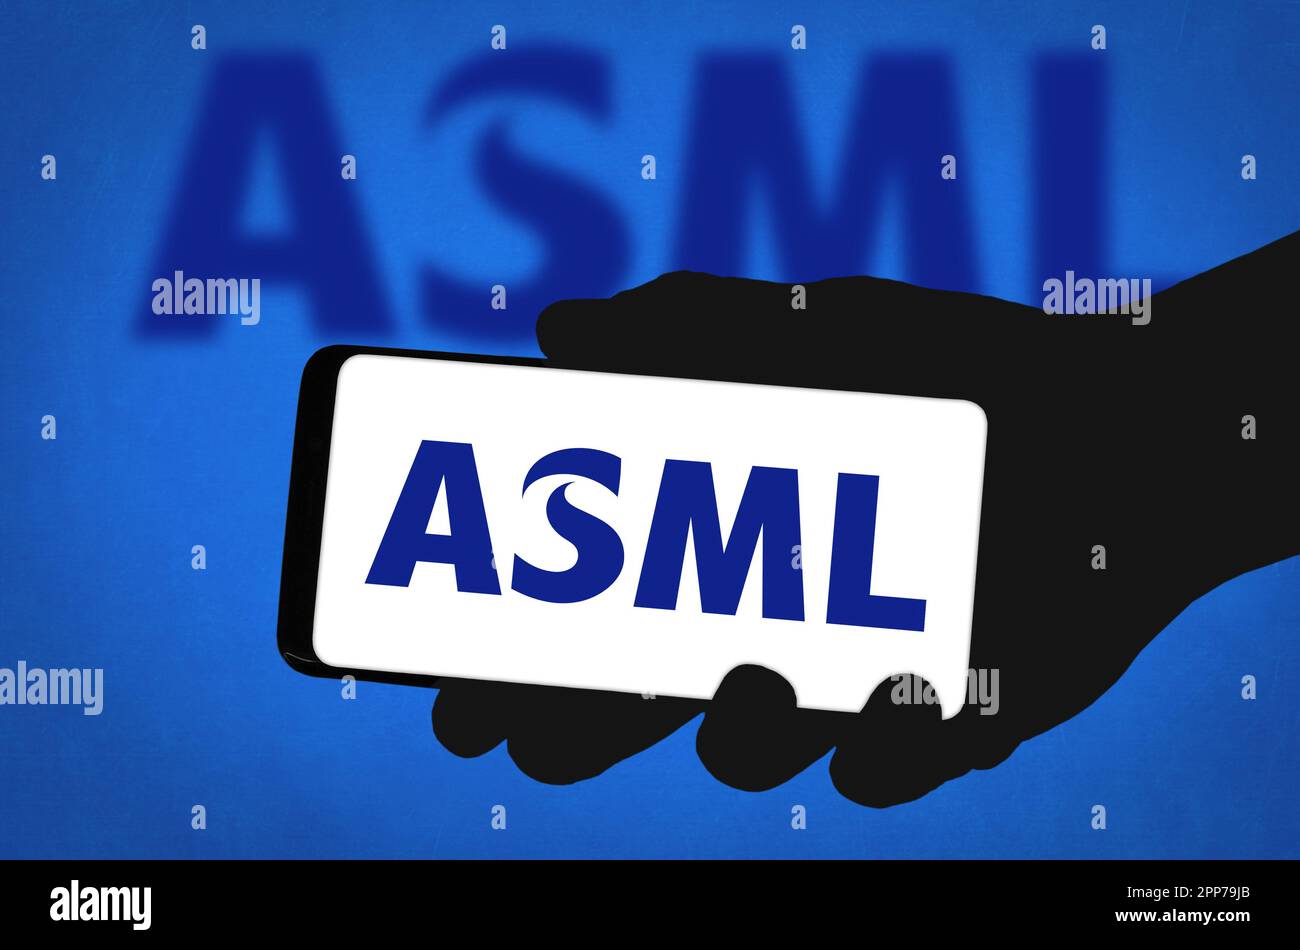 ASML Holding – Advanced Semiconductor Materials Lithography (AML Holding – Erweiterte Halbleitermaterialien – Lithografie Stockfoto